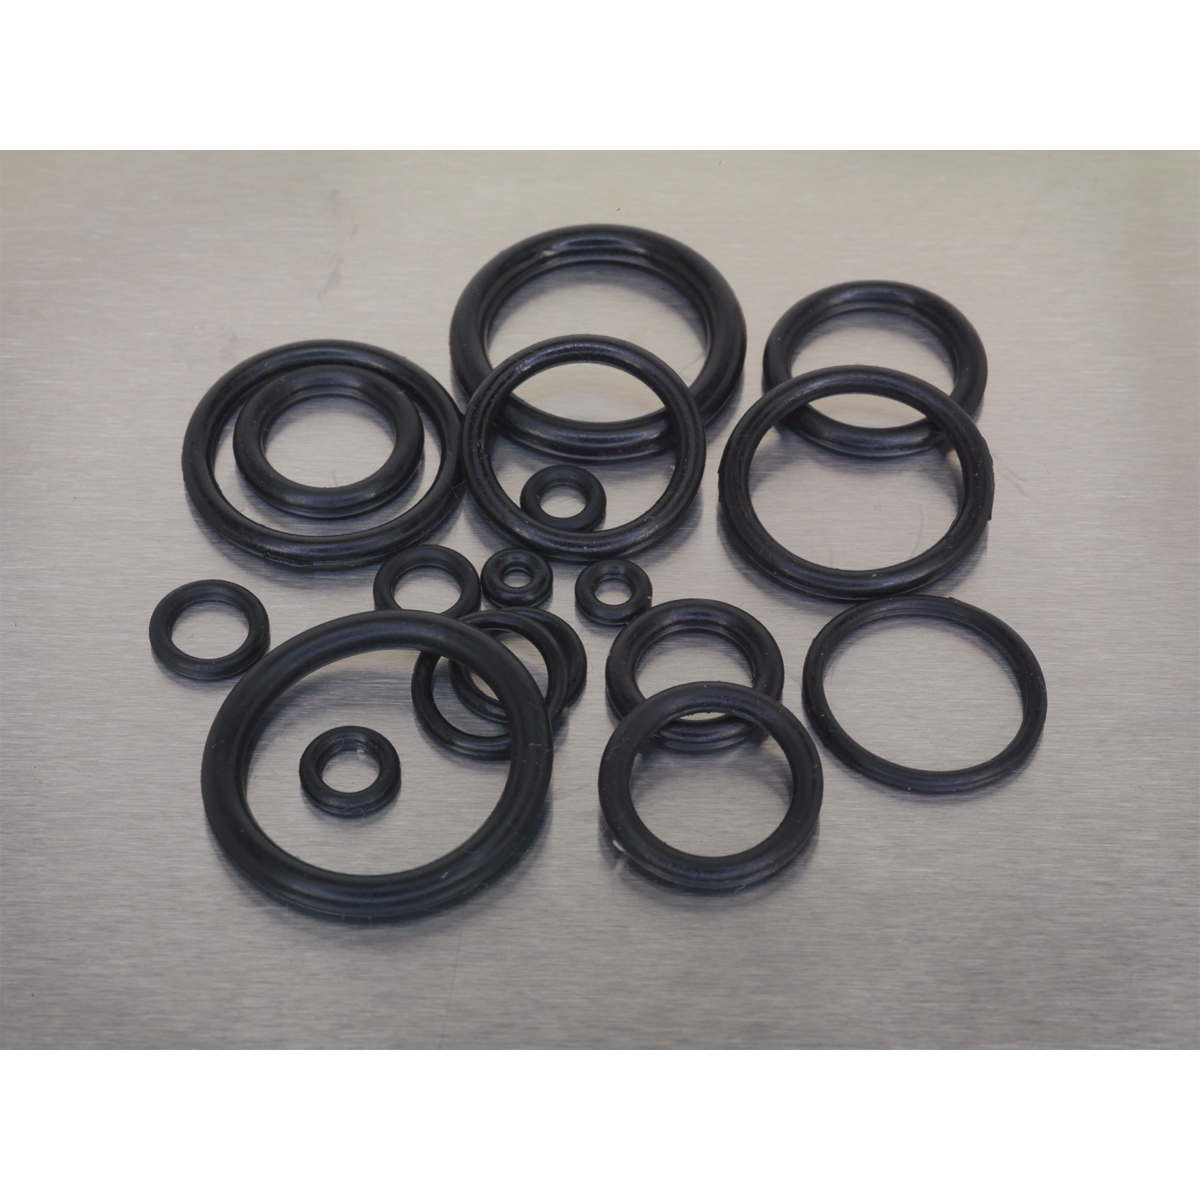 Rubber O-Ring Assortment 225pc Metric - AB004OR - Farming Parts